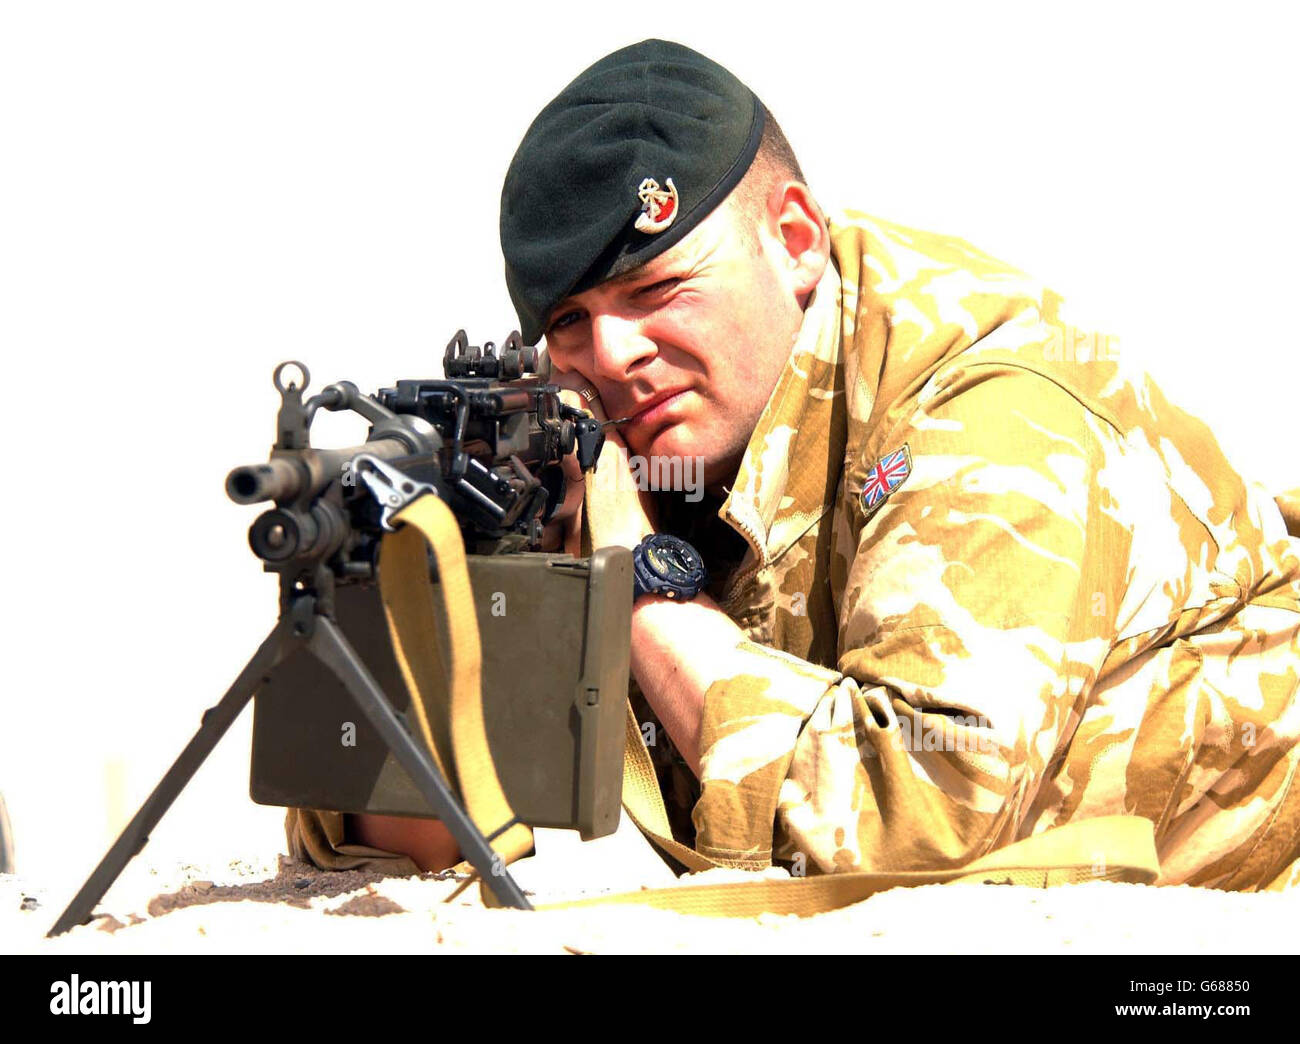 Private Marcus Williams, 25, 1st Light Infantry Battalion, tests the latest issue MINIMI automatic machine gun distributed to the British army. The gun was issued to troops on the Kuwait-Iraq border from the 1st Light Infantry Battalion (2nd Royal Tank Regiment Battle Group) after undergoing rigorous testing by ballistic experts. Stock Photo